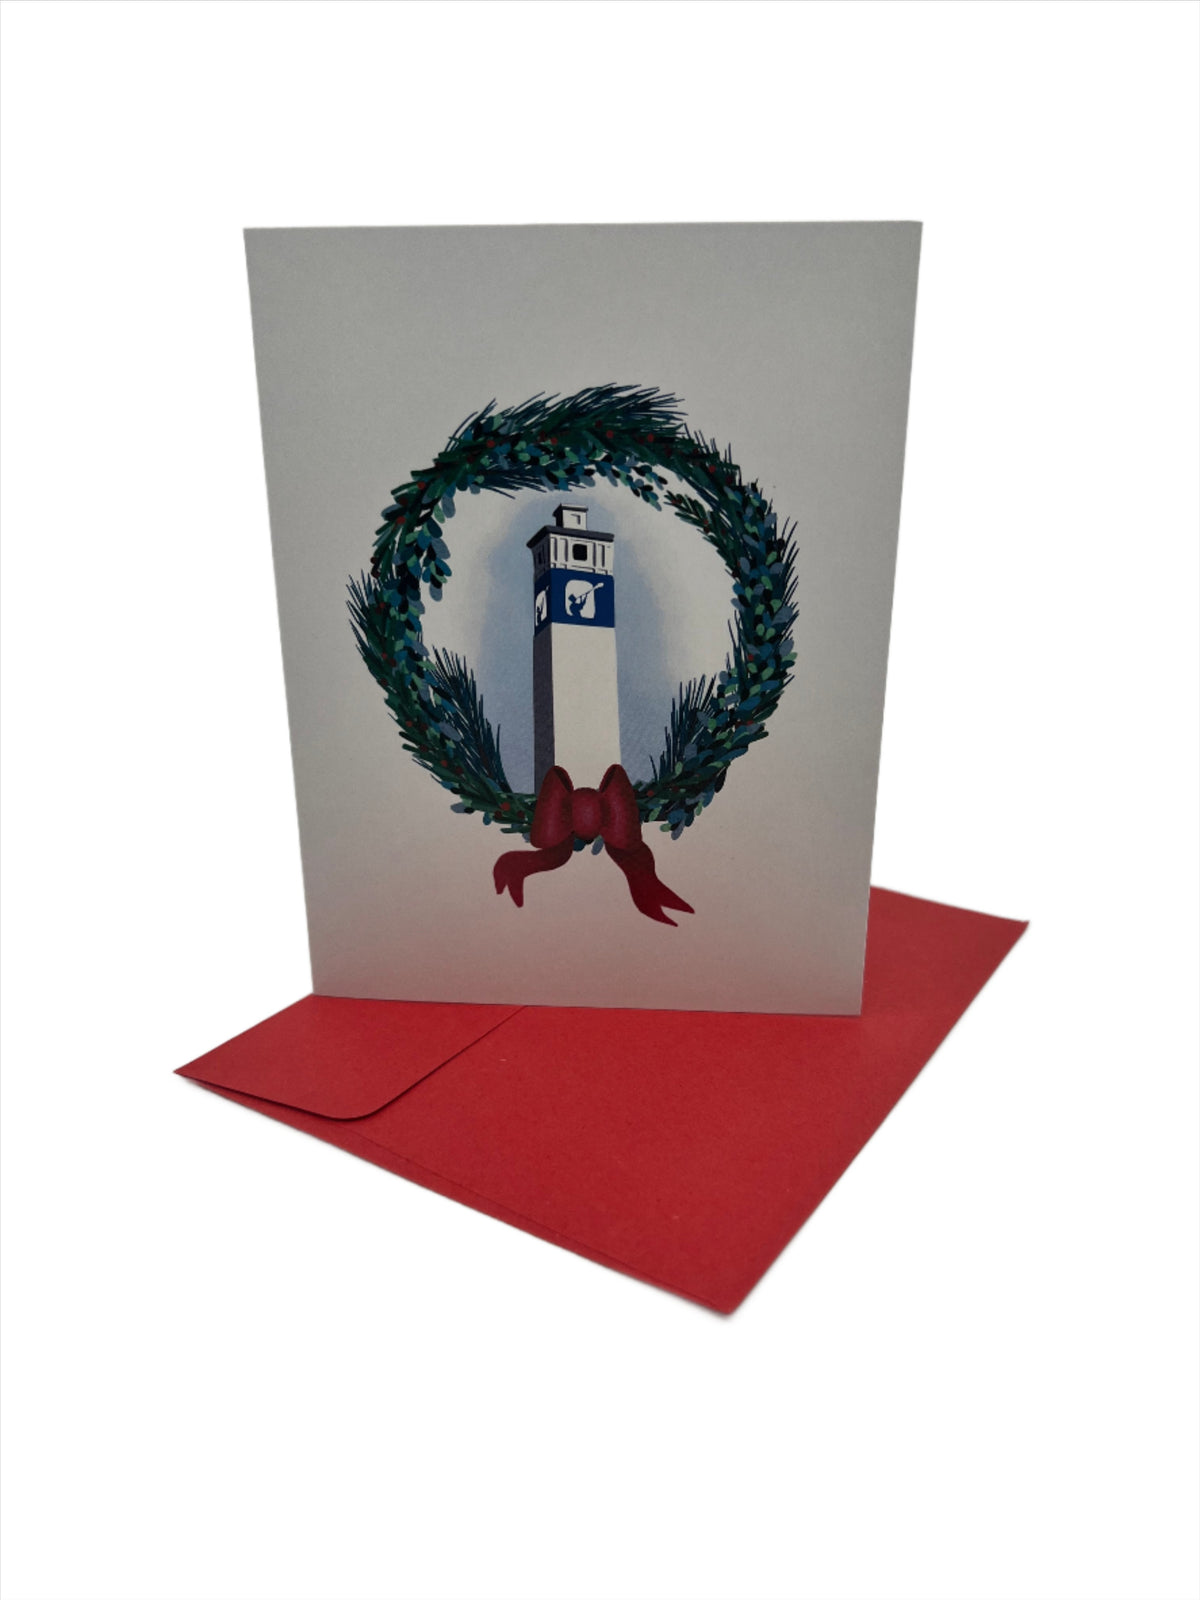 Corning Little Joe Holiday Card 10-pack  Ready to ship